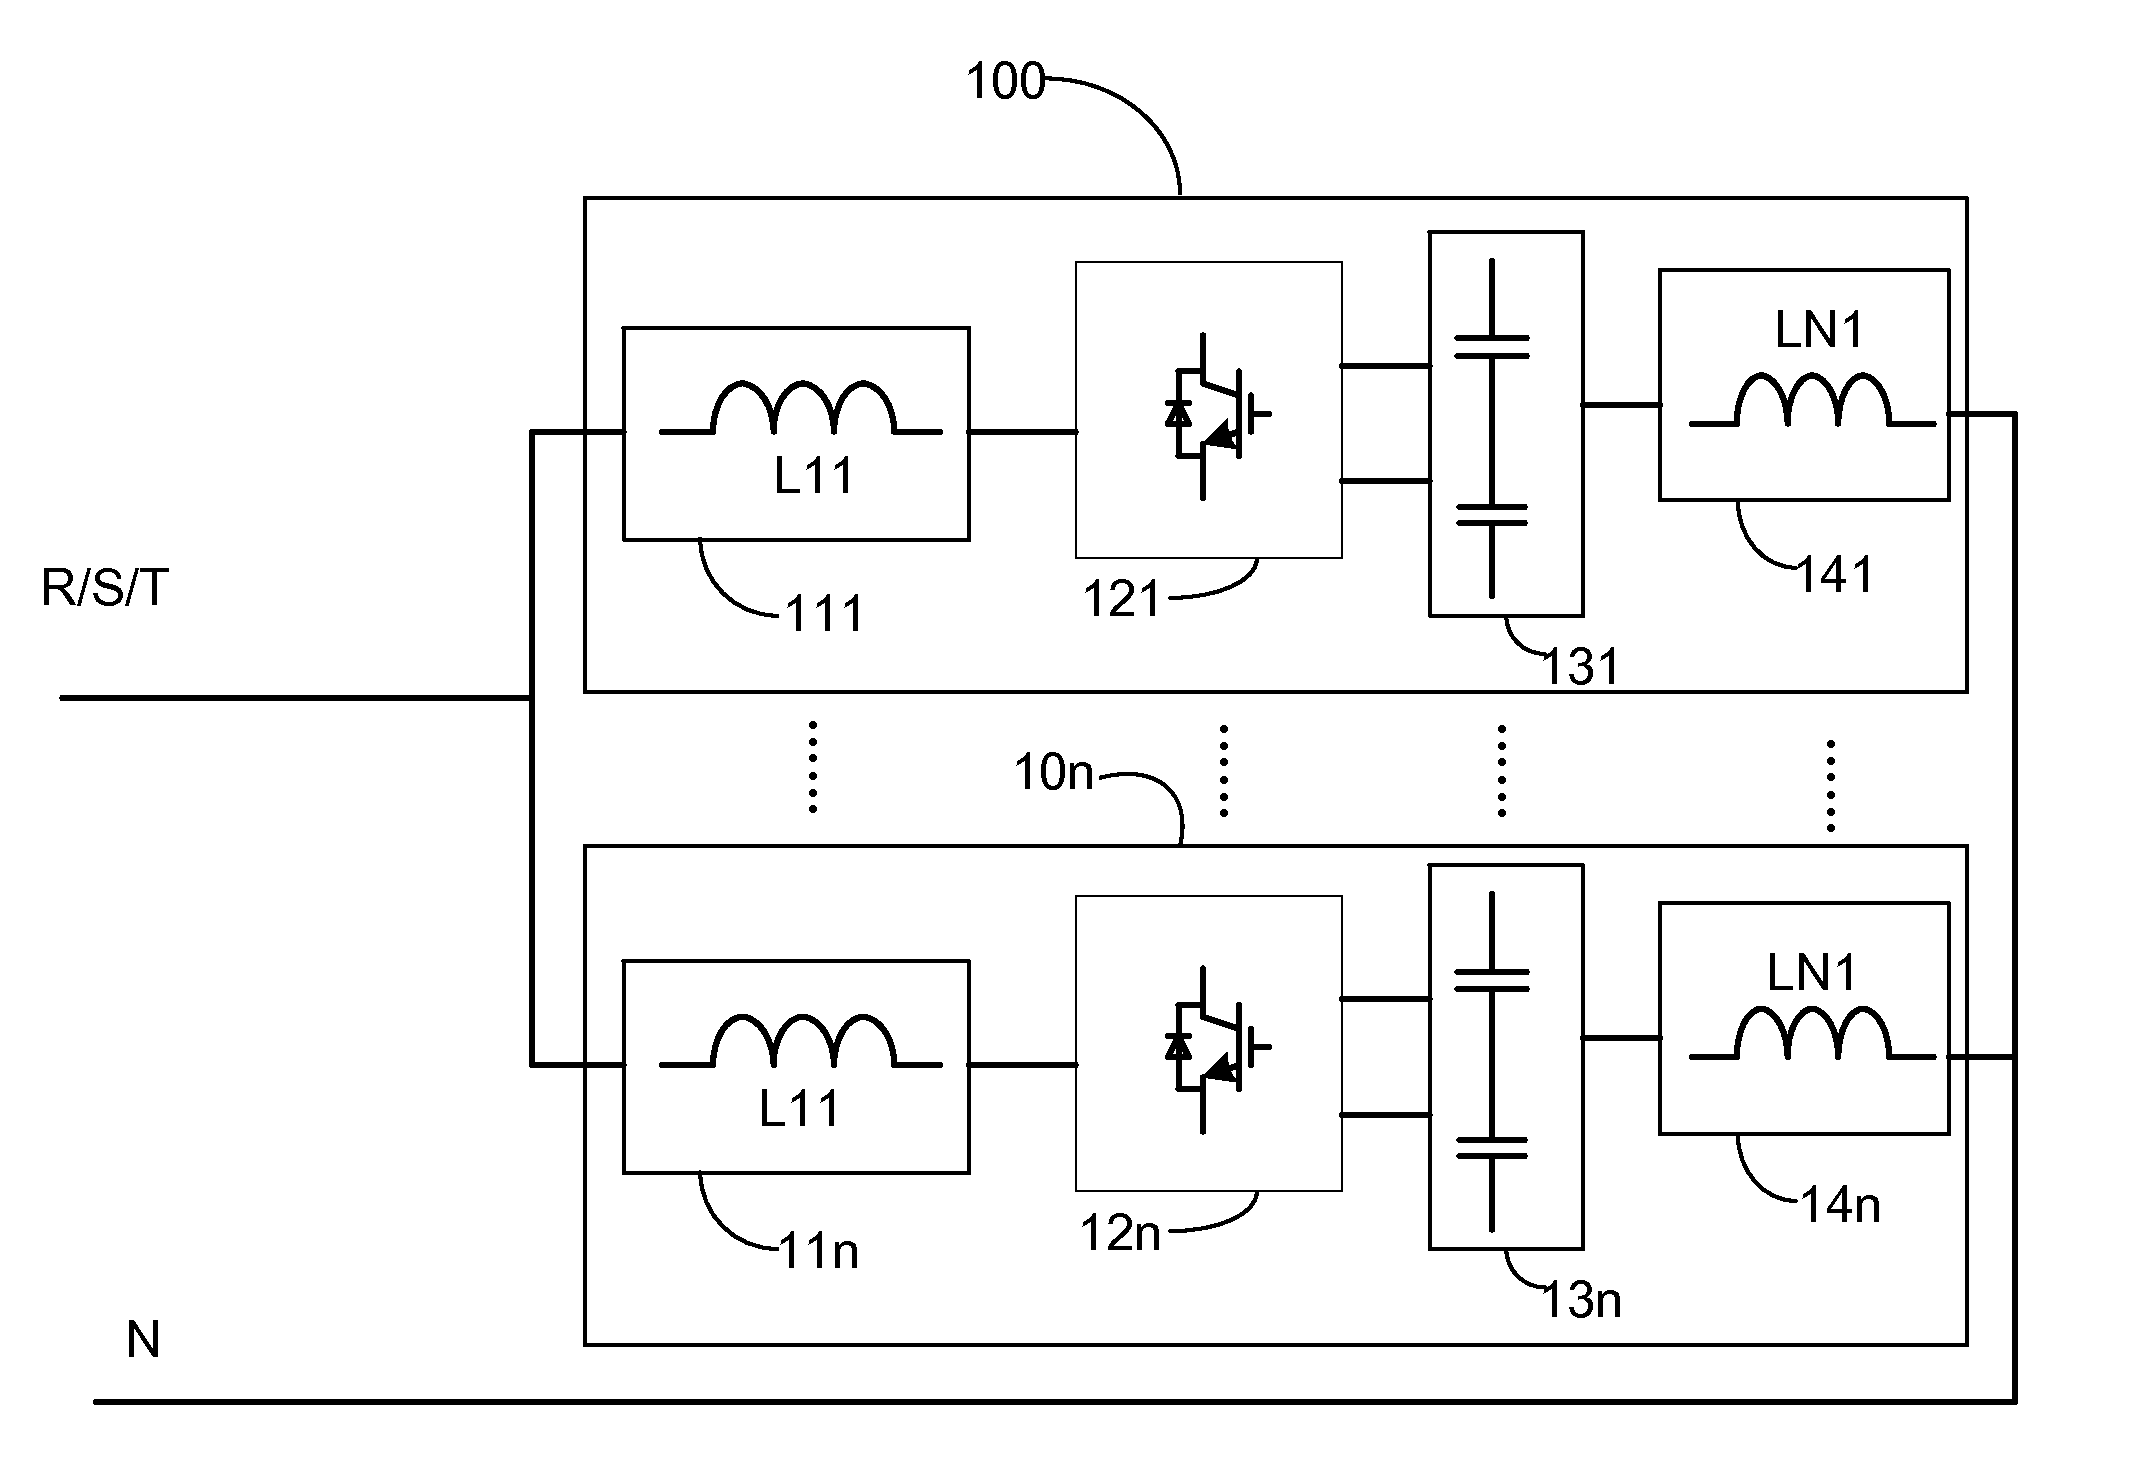 Multiple inverter and active power filter system